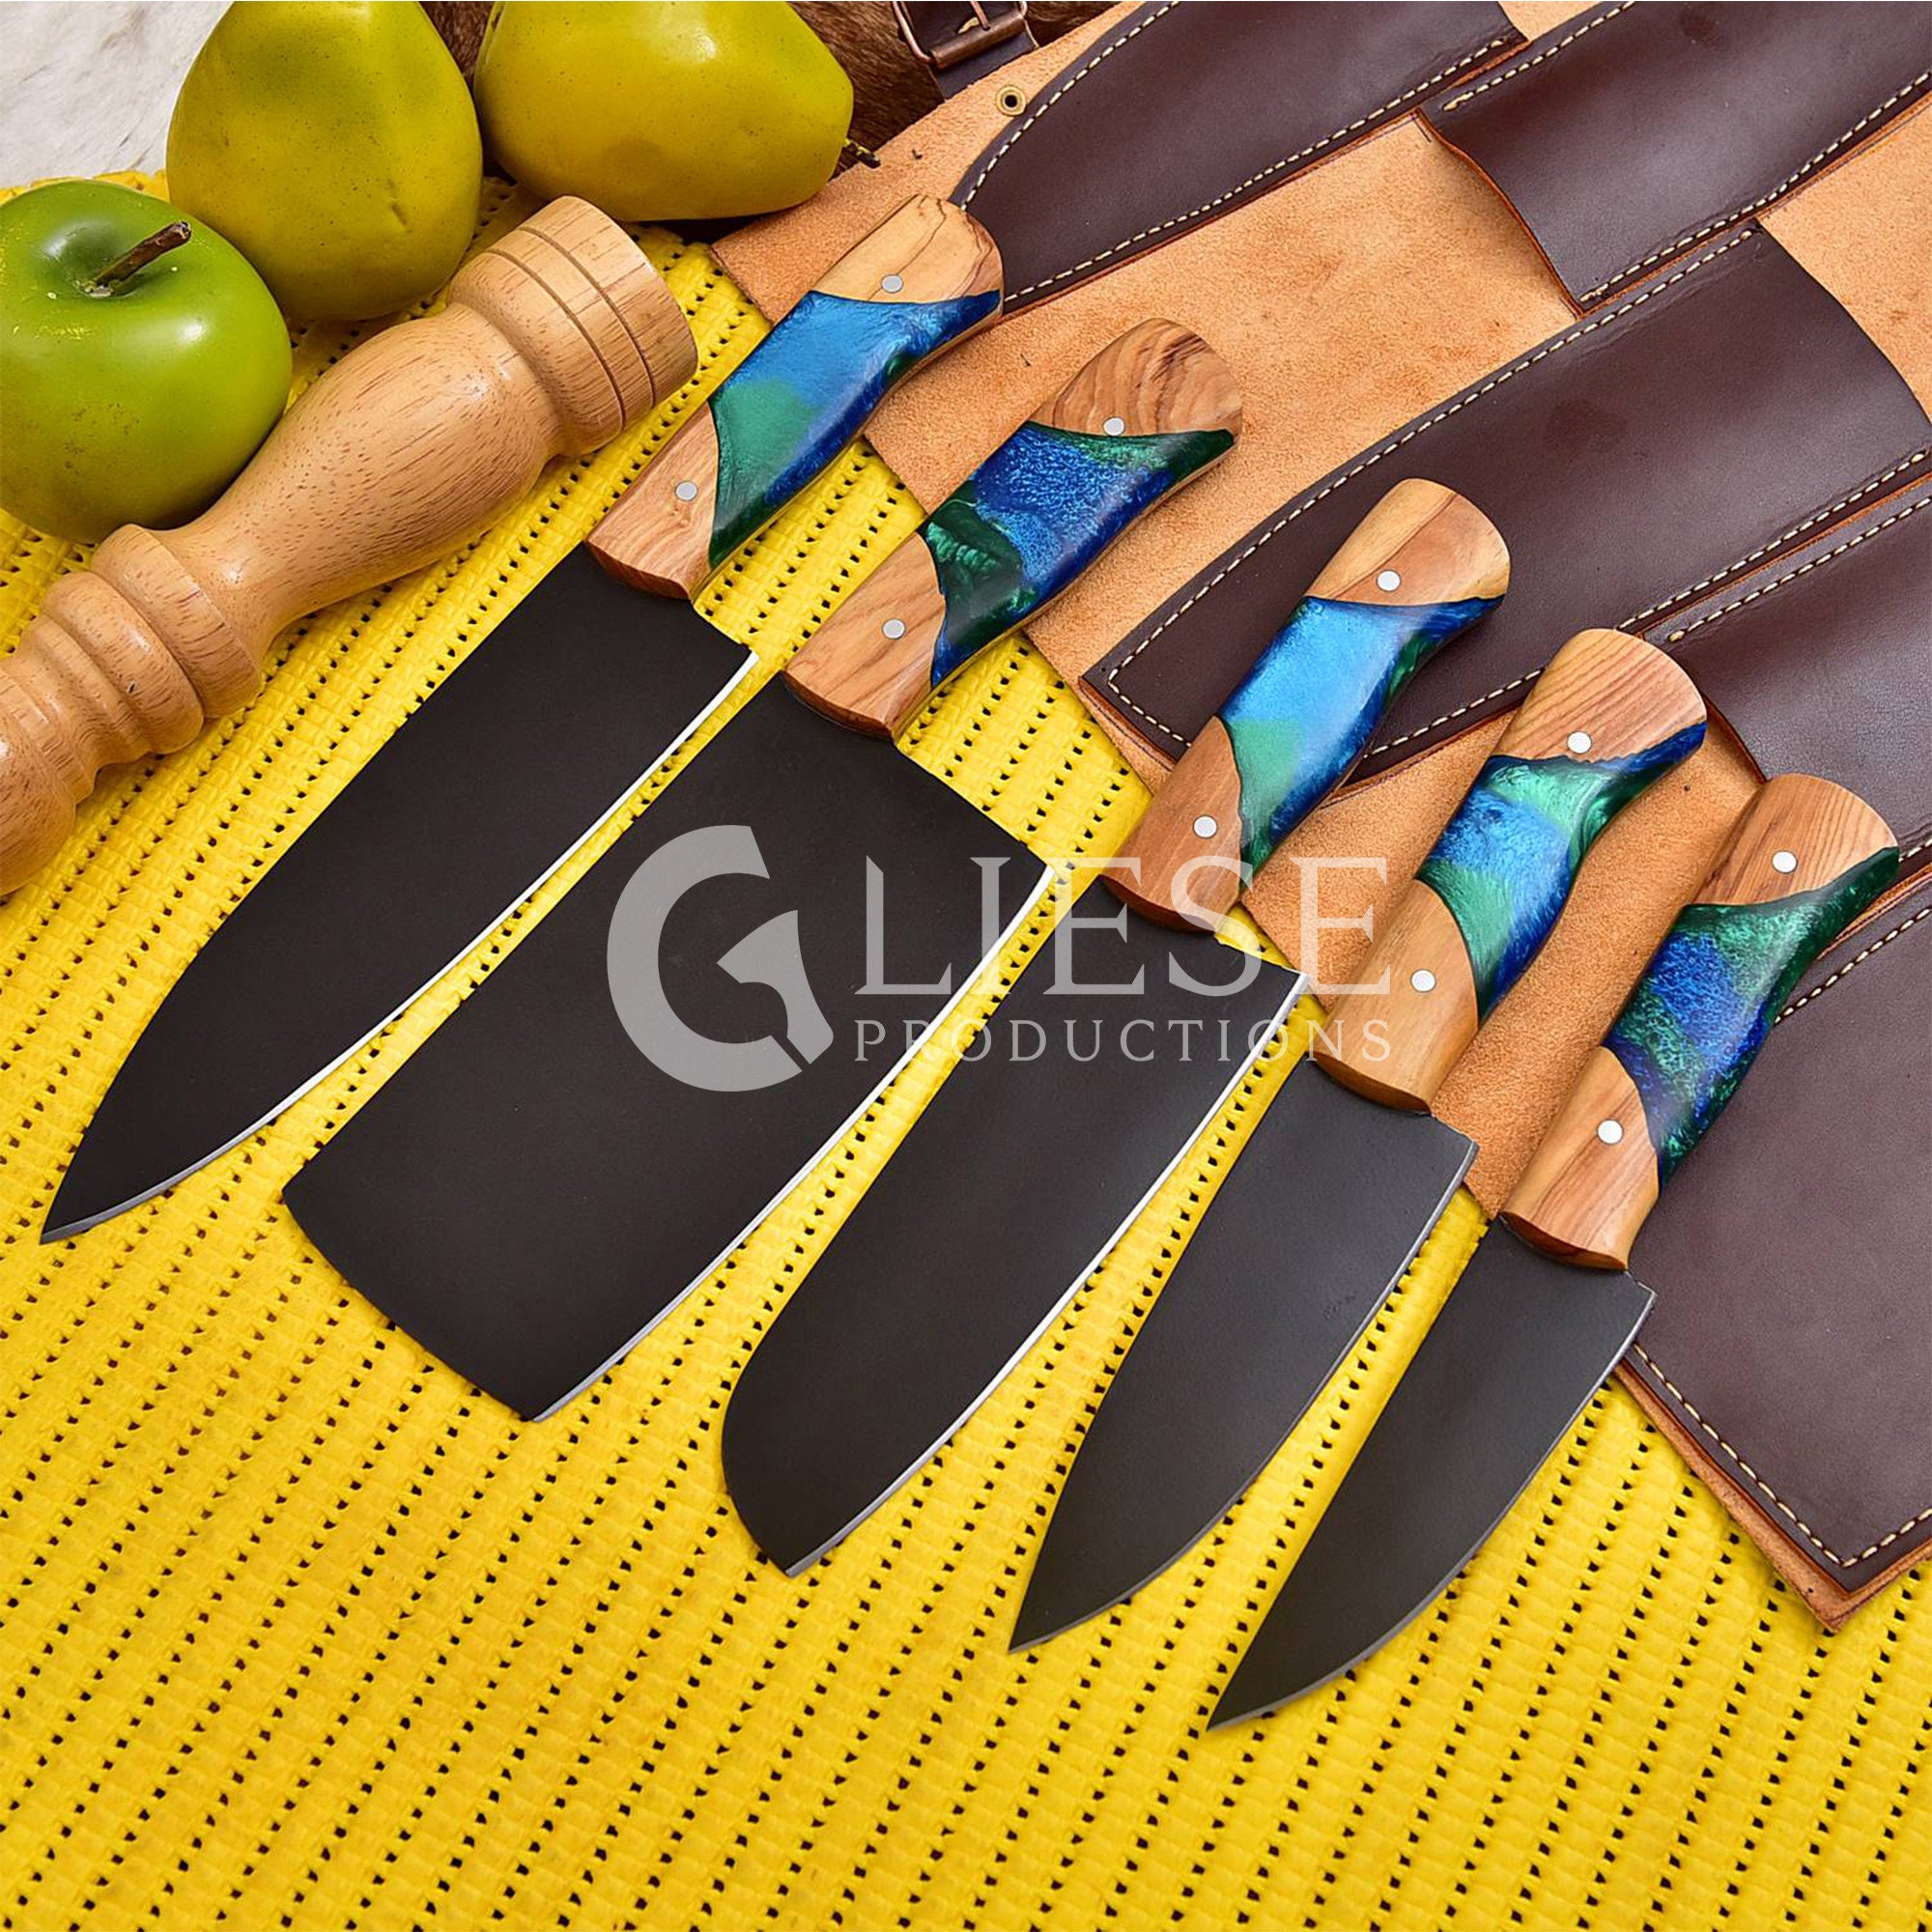 Custom Handmade Forged Stainless Steel Black Powder Coated Chef Knife Set  of 5 Pieces, Kitchen Knives With Leather Roll Kit, Gift for Her 